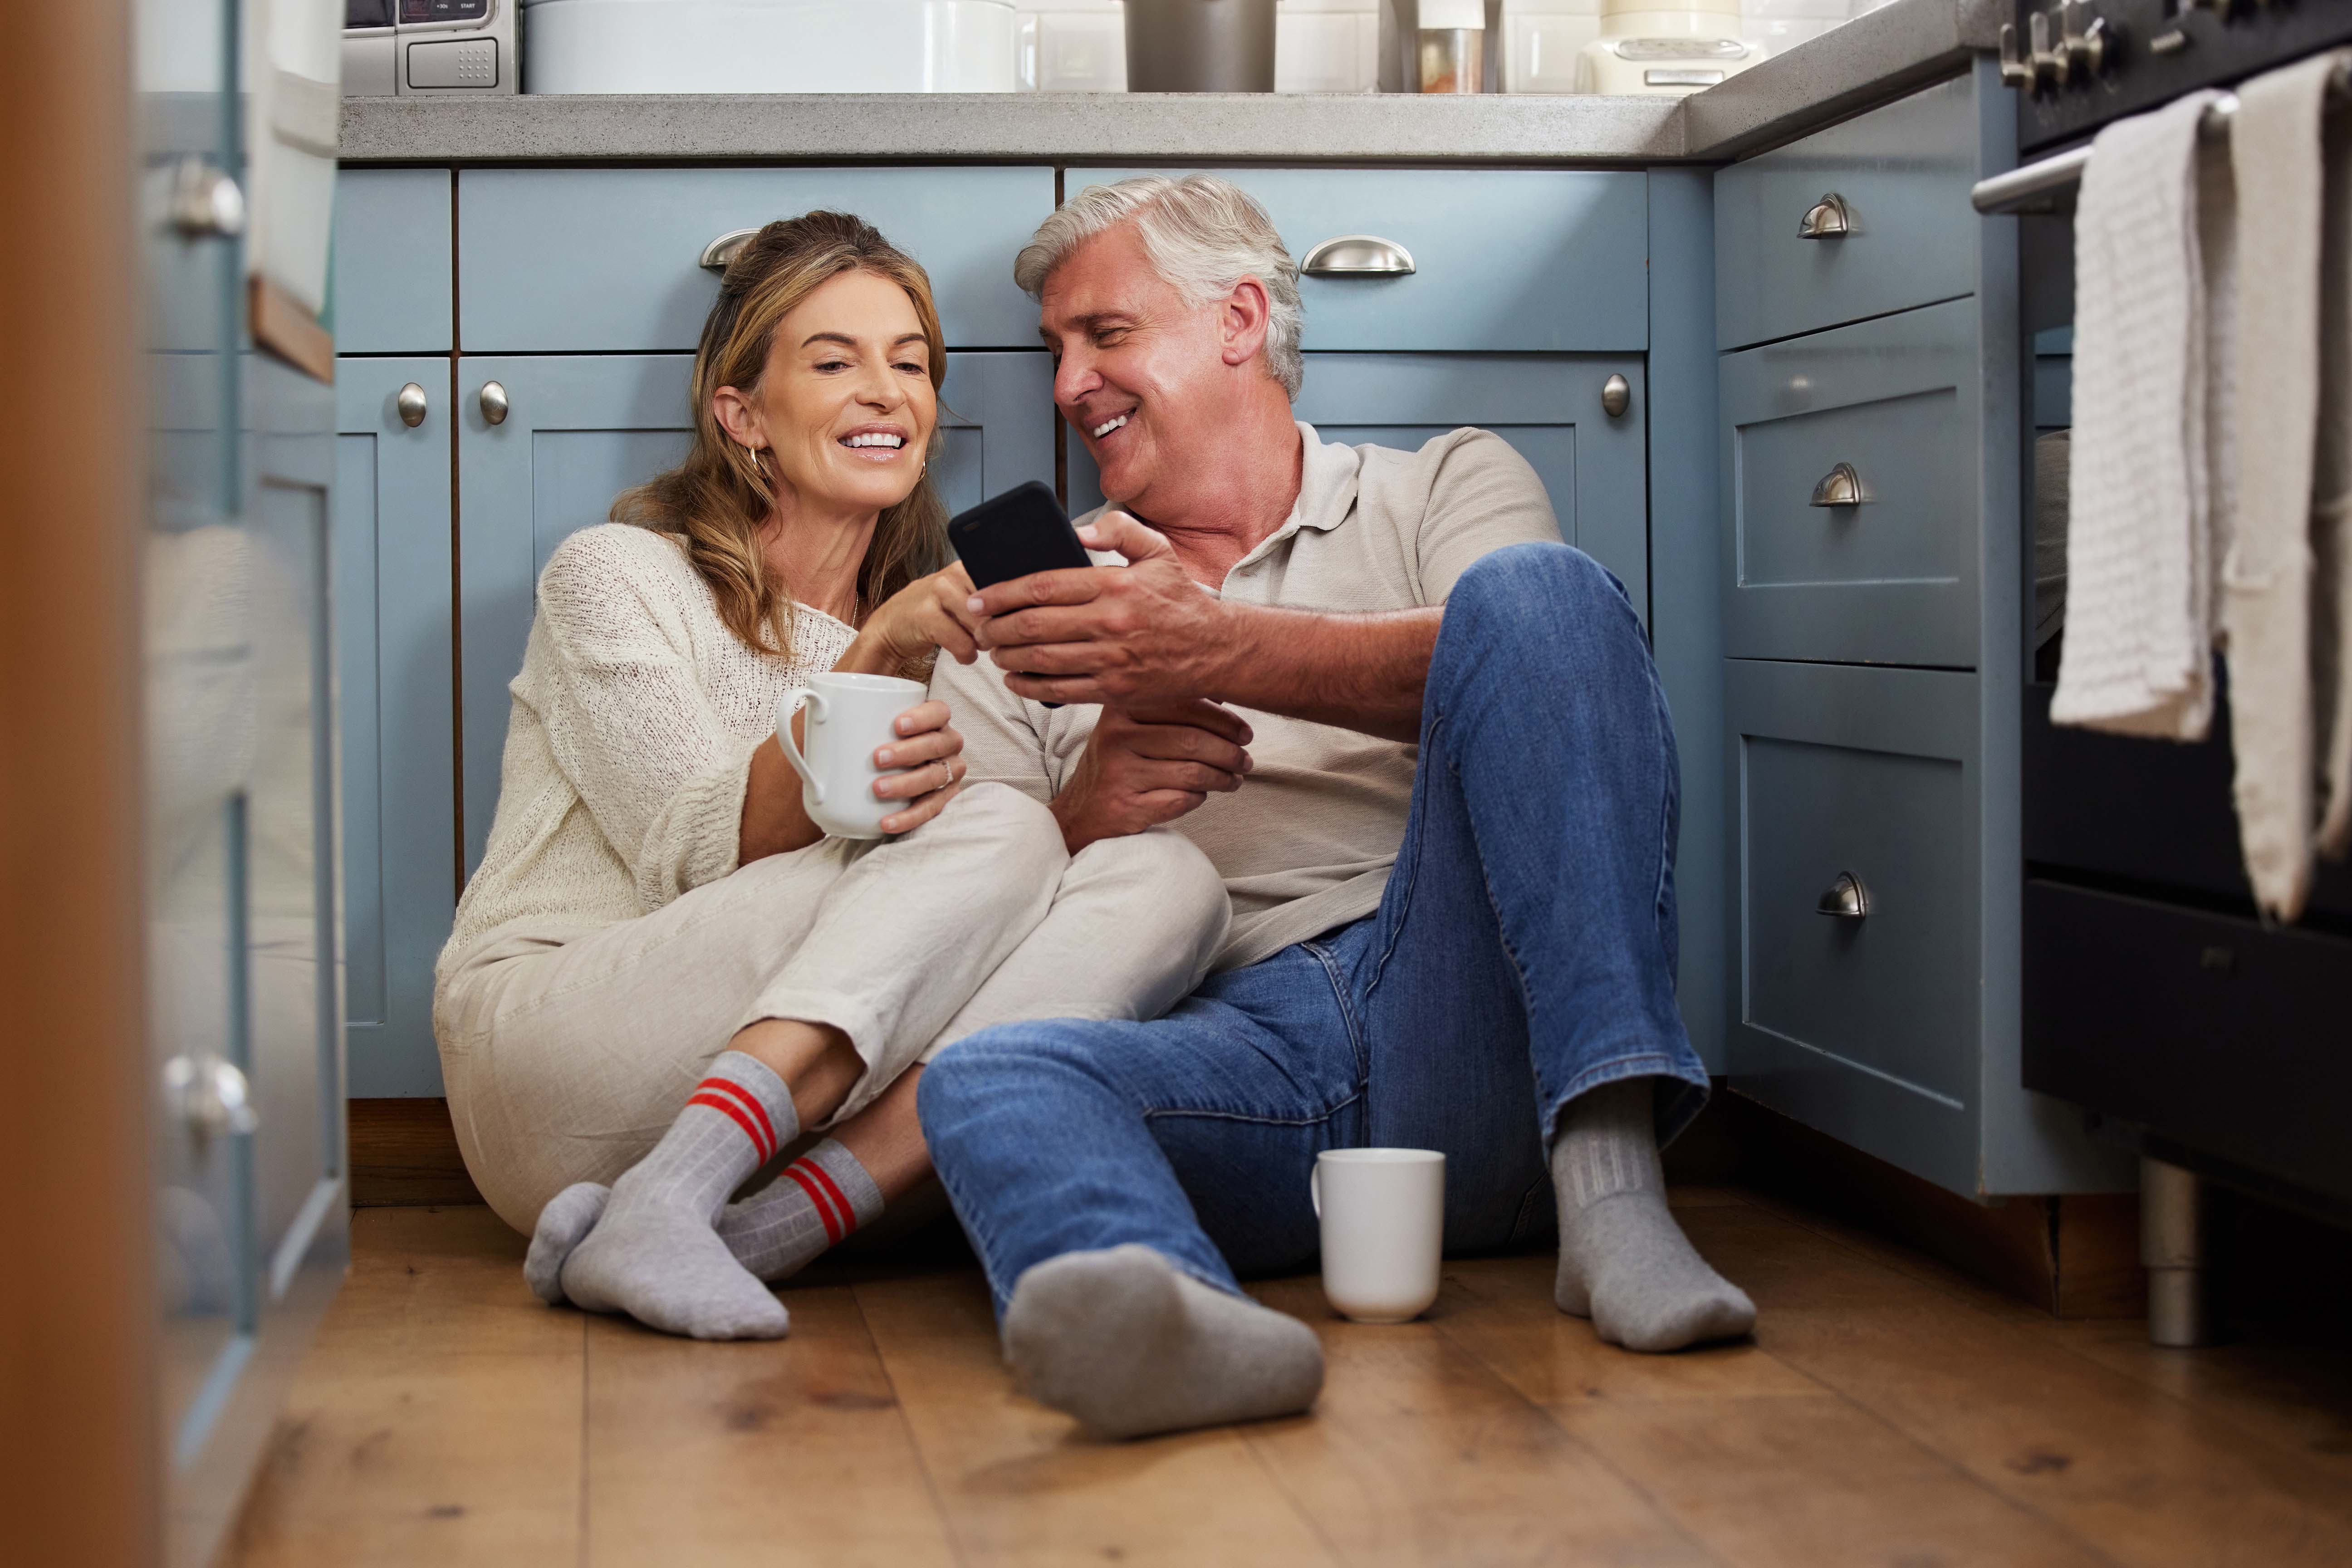 A couple sitting in the kitchen on the floor casually smiling and reading on the phone